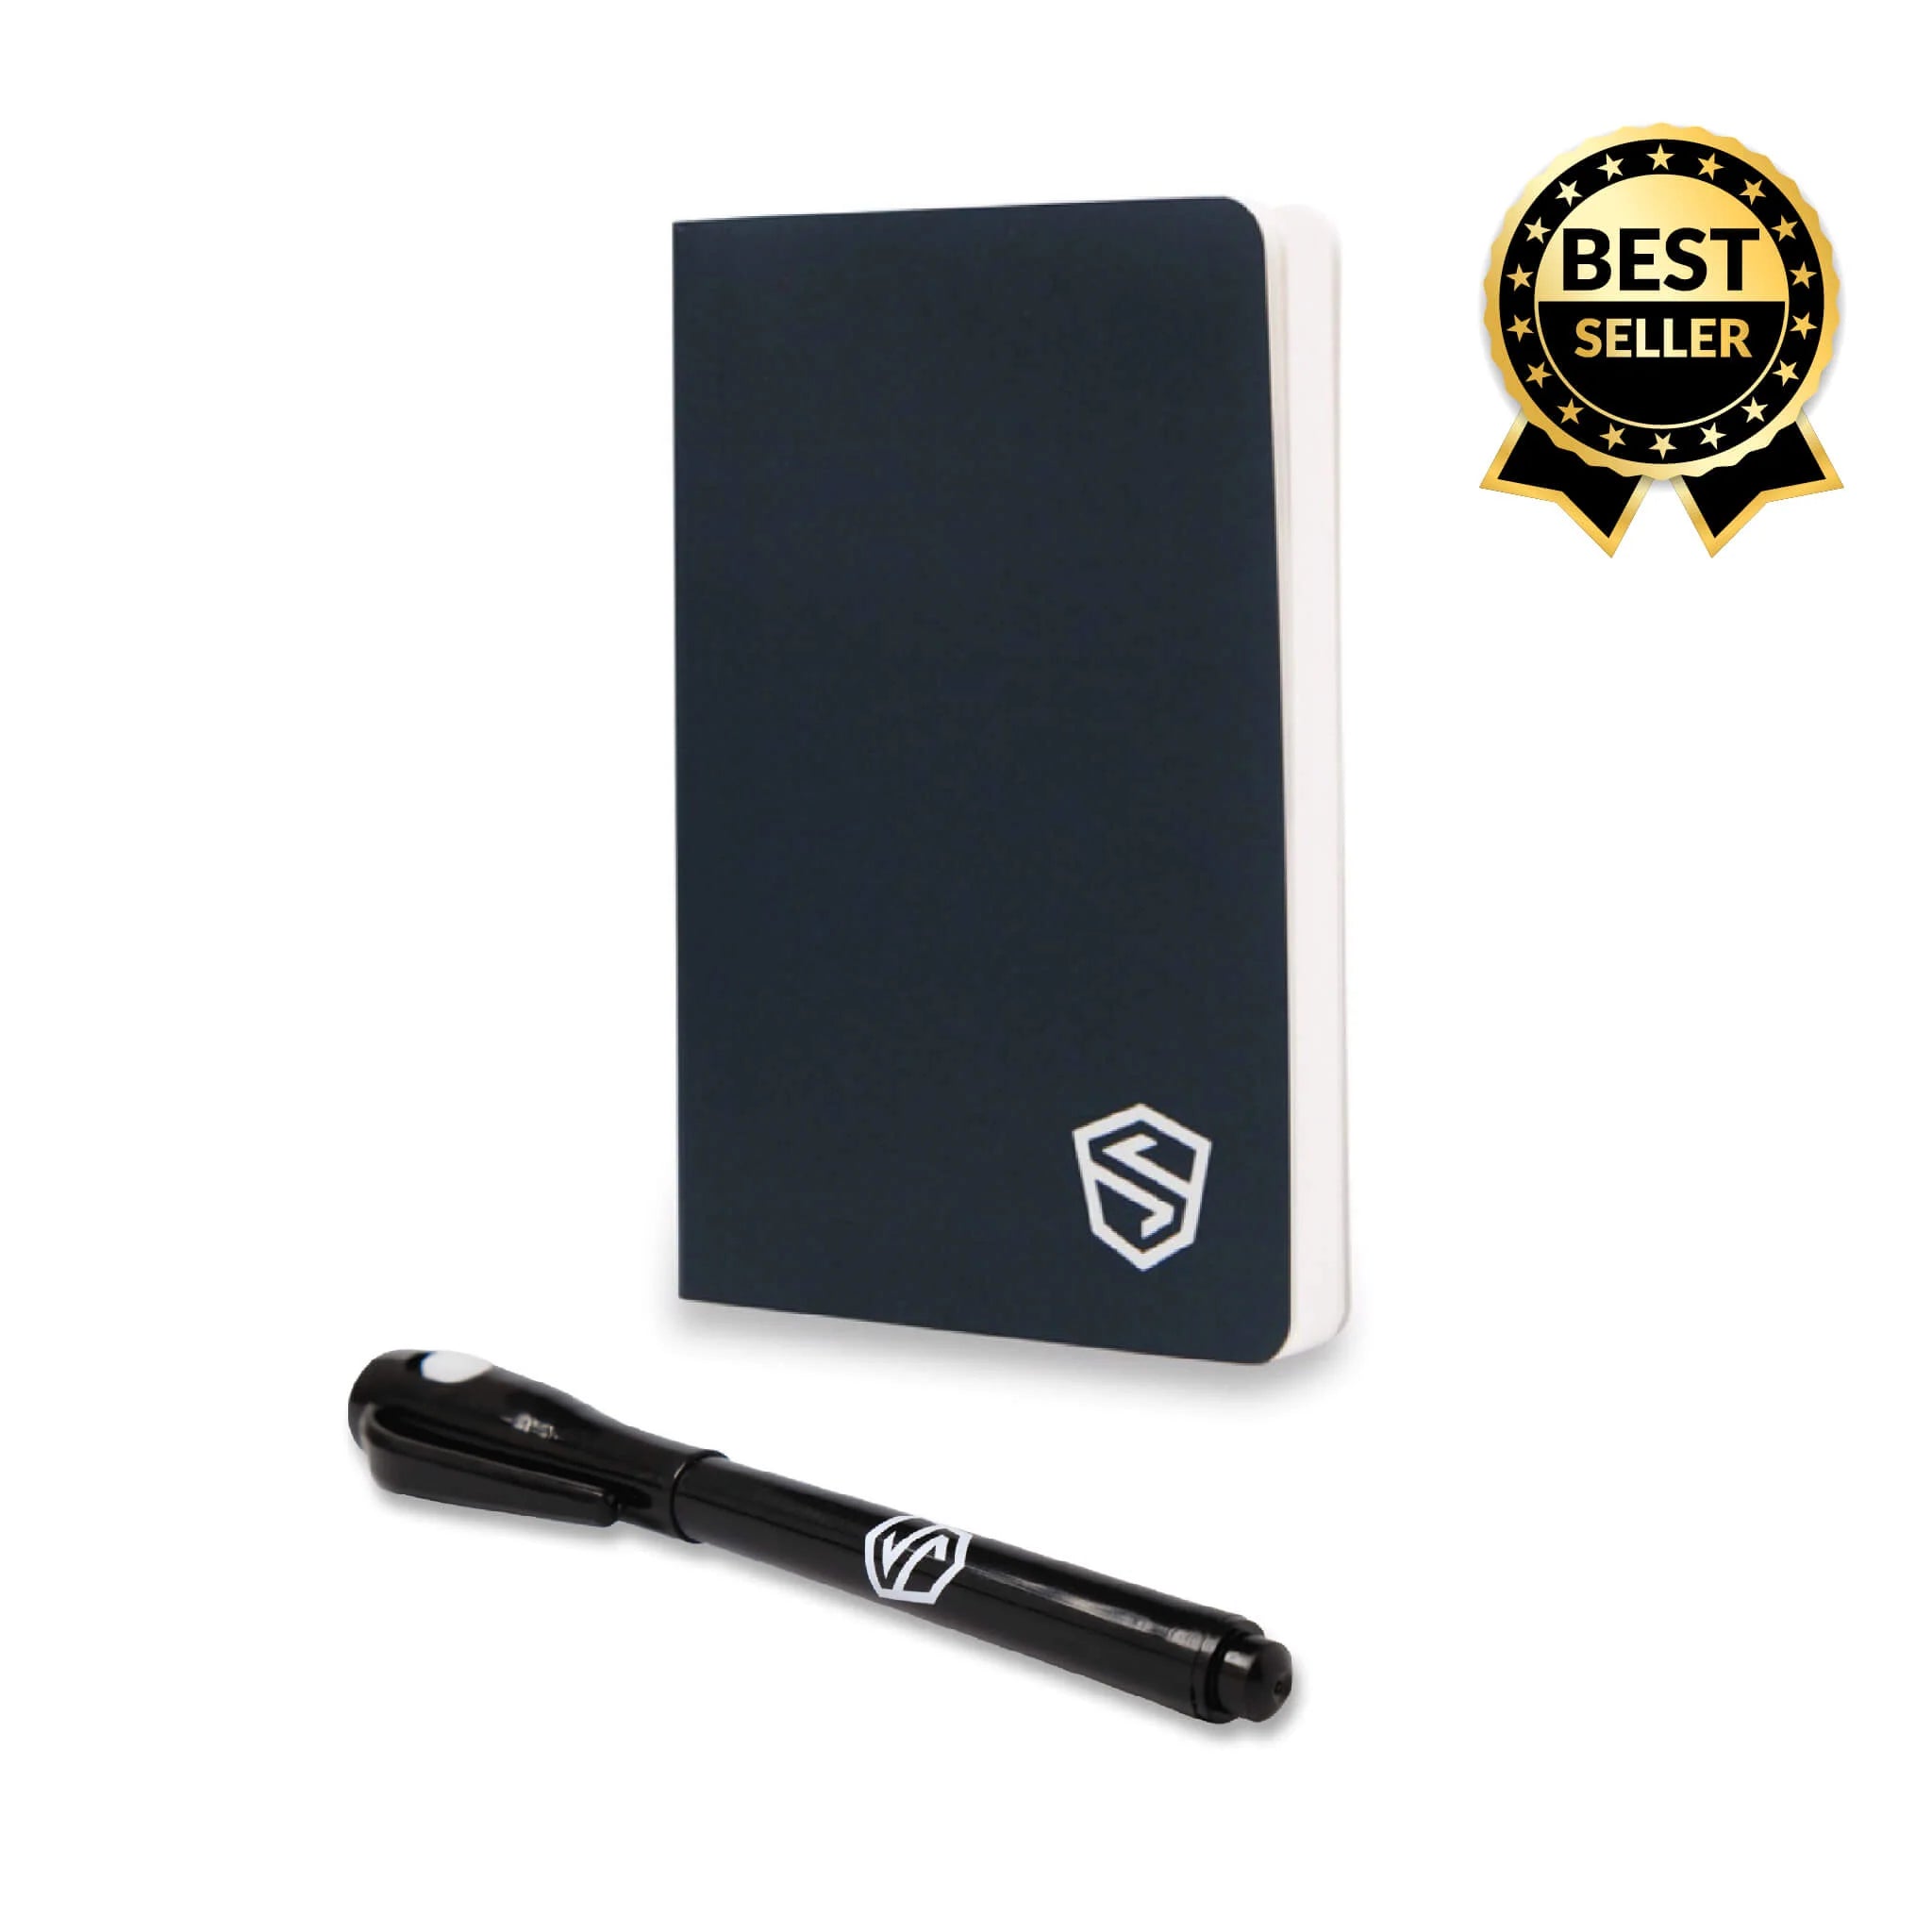 Shieldfolio Stonebook seed phrase notebook and ghost pen to backup your crypto wallet secret seed phrases with invisible ink